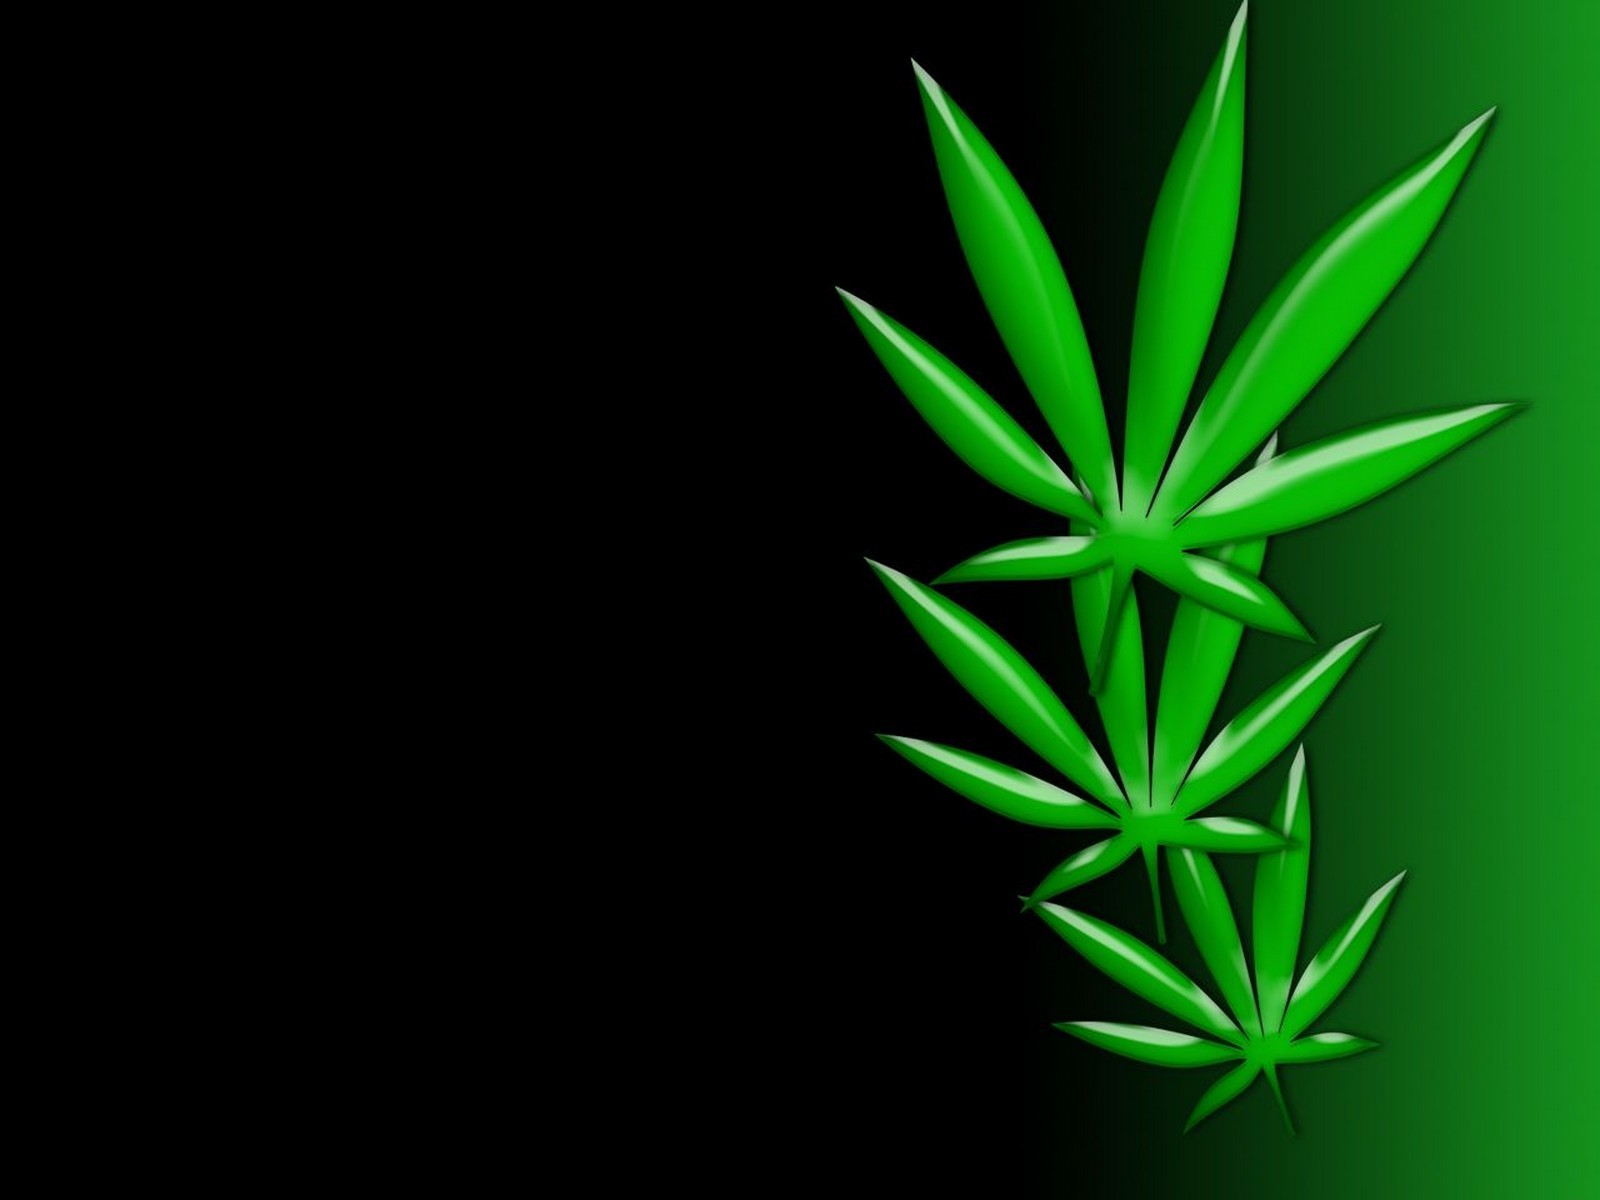 WEED 1080P 2k 4k Full HD Wallpapers Backgrounds Free Download   Wallpaper Crafter